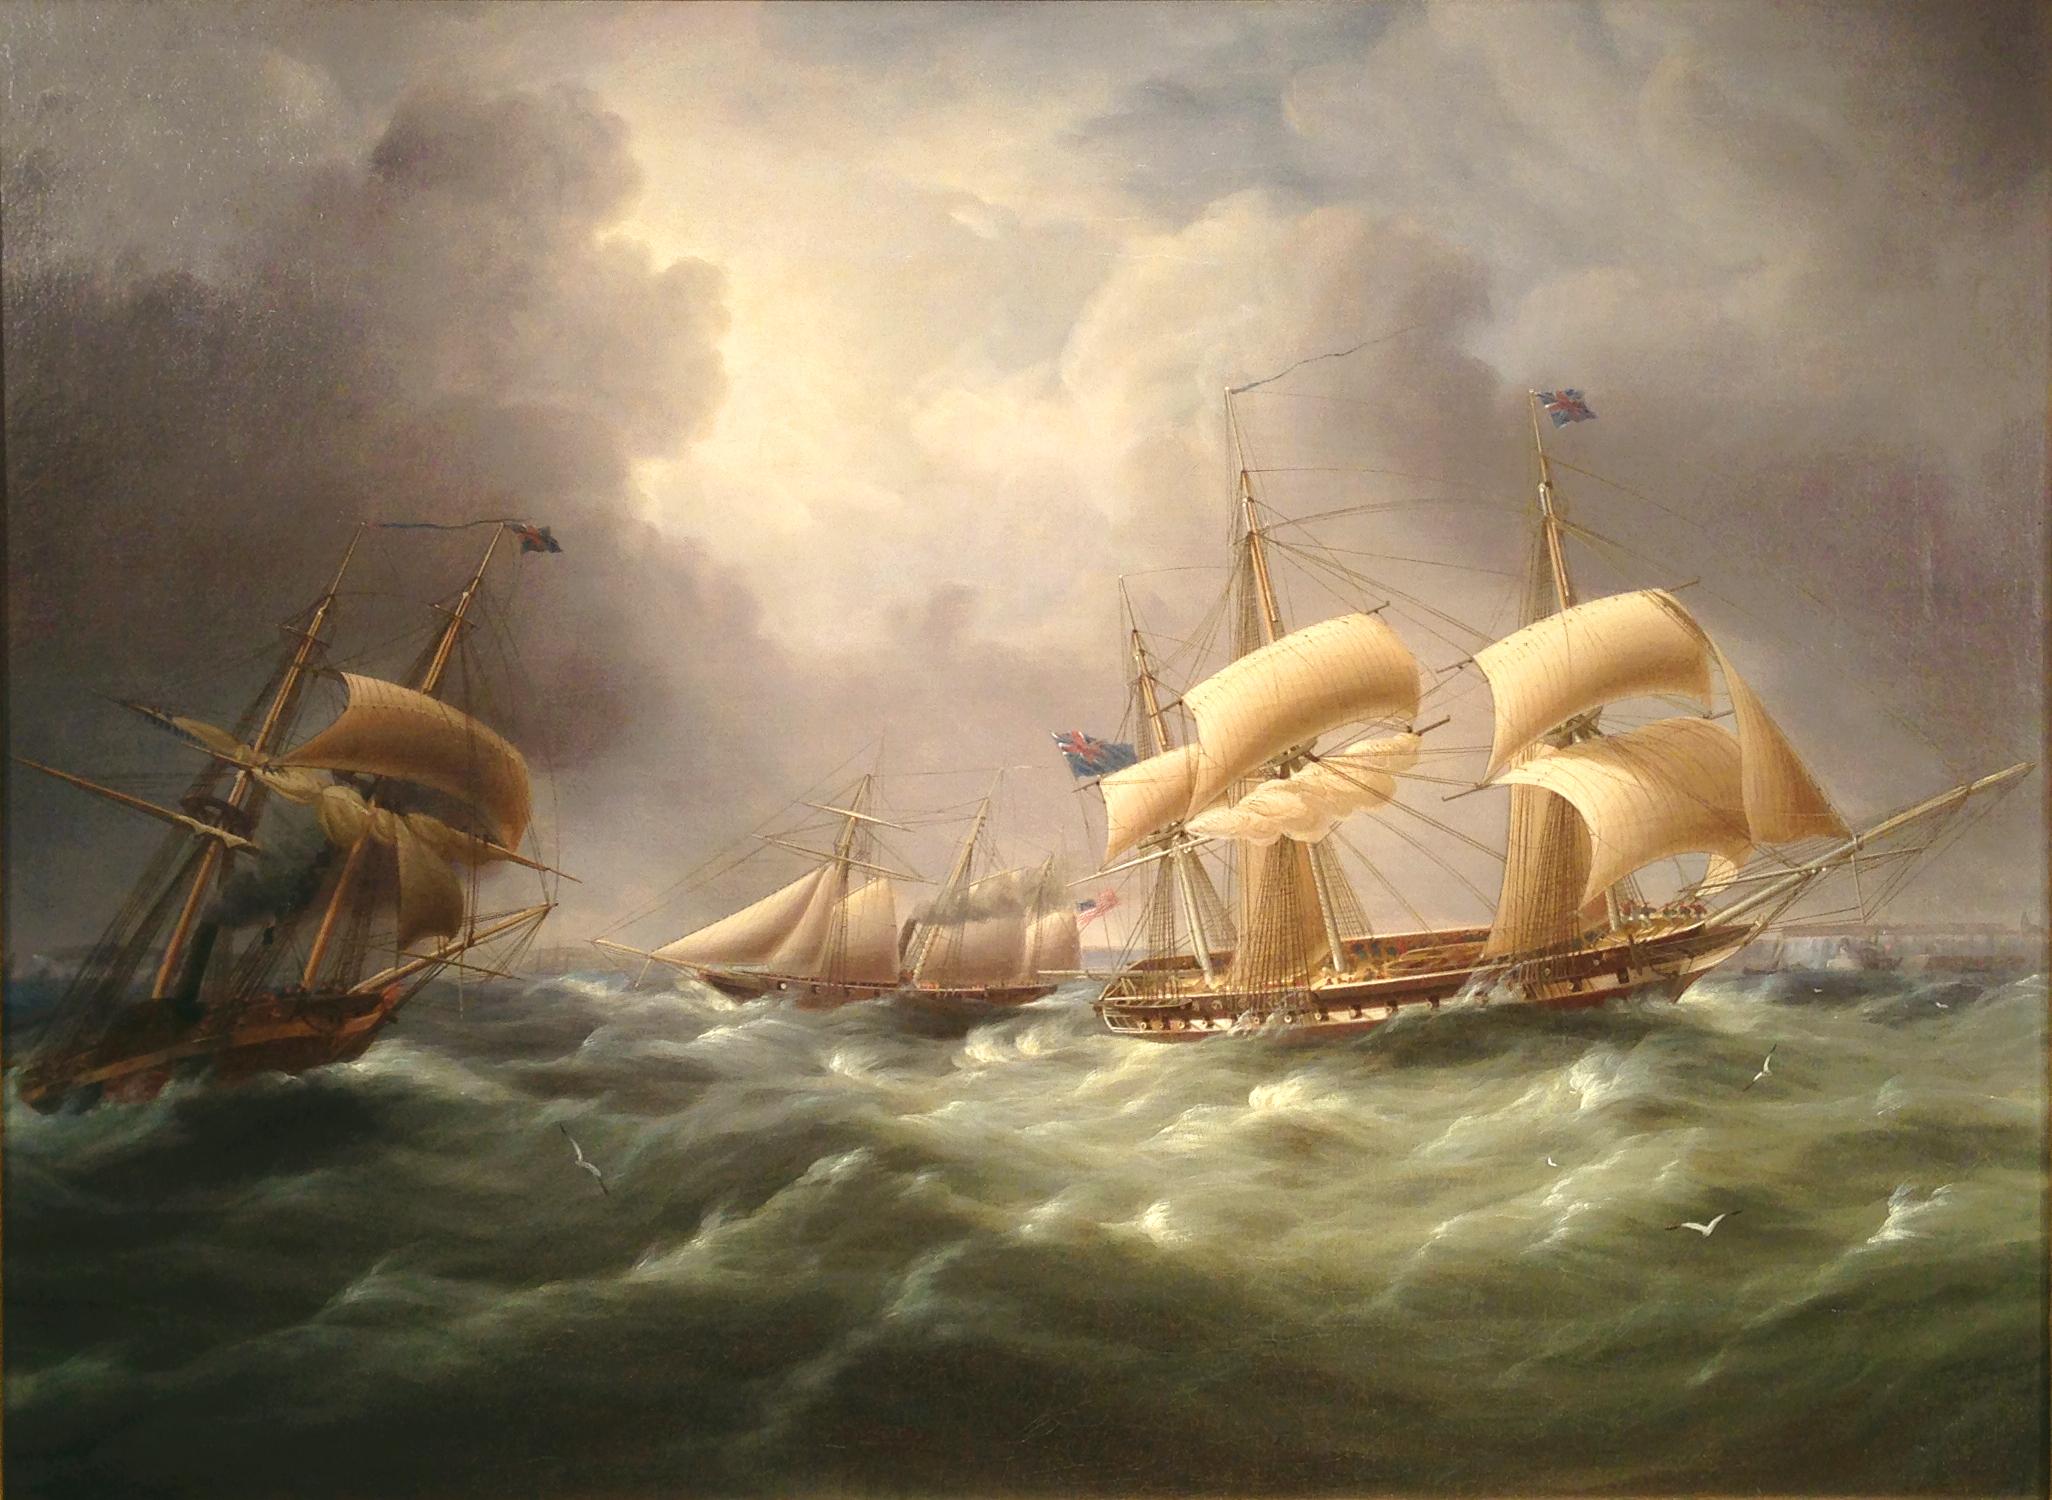 James Edward Buttersworth Landscape Painting - American Steam Schooner Meets British Frigates Crossing the English Channel